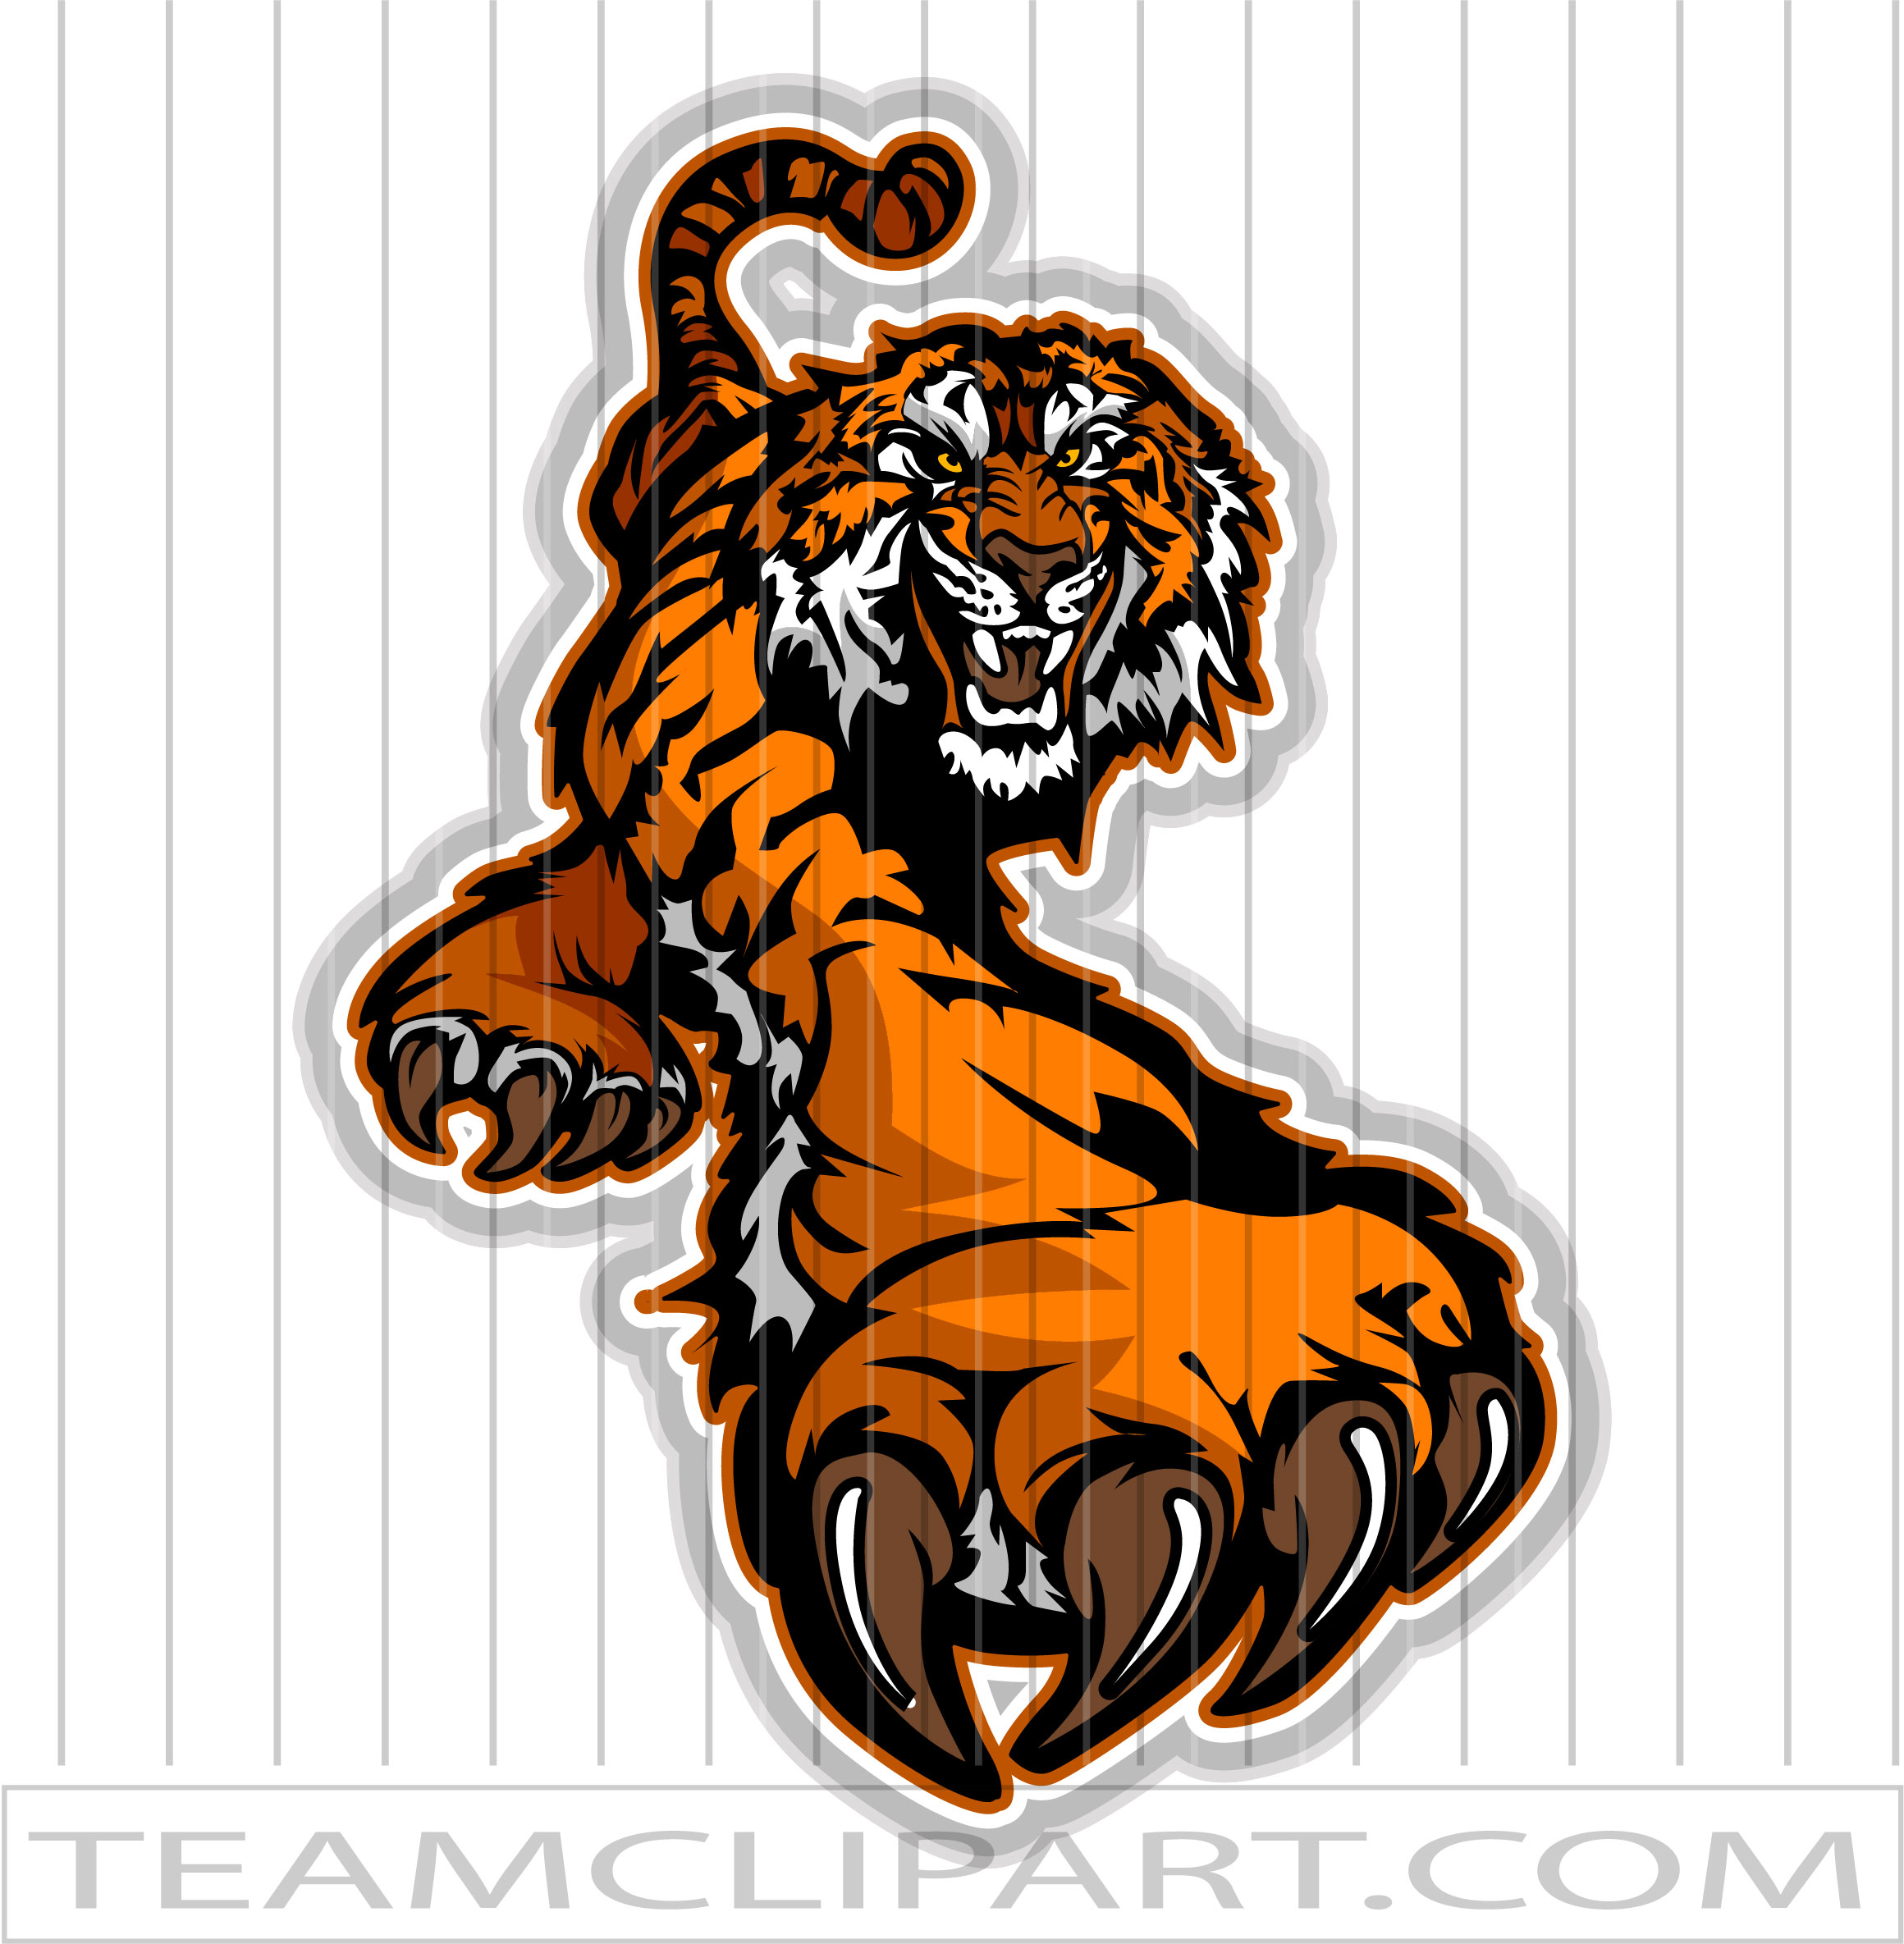 Prowling Tiger Mascot  Production Ready Artwork for T-Shirt Printing